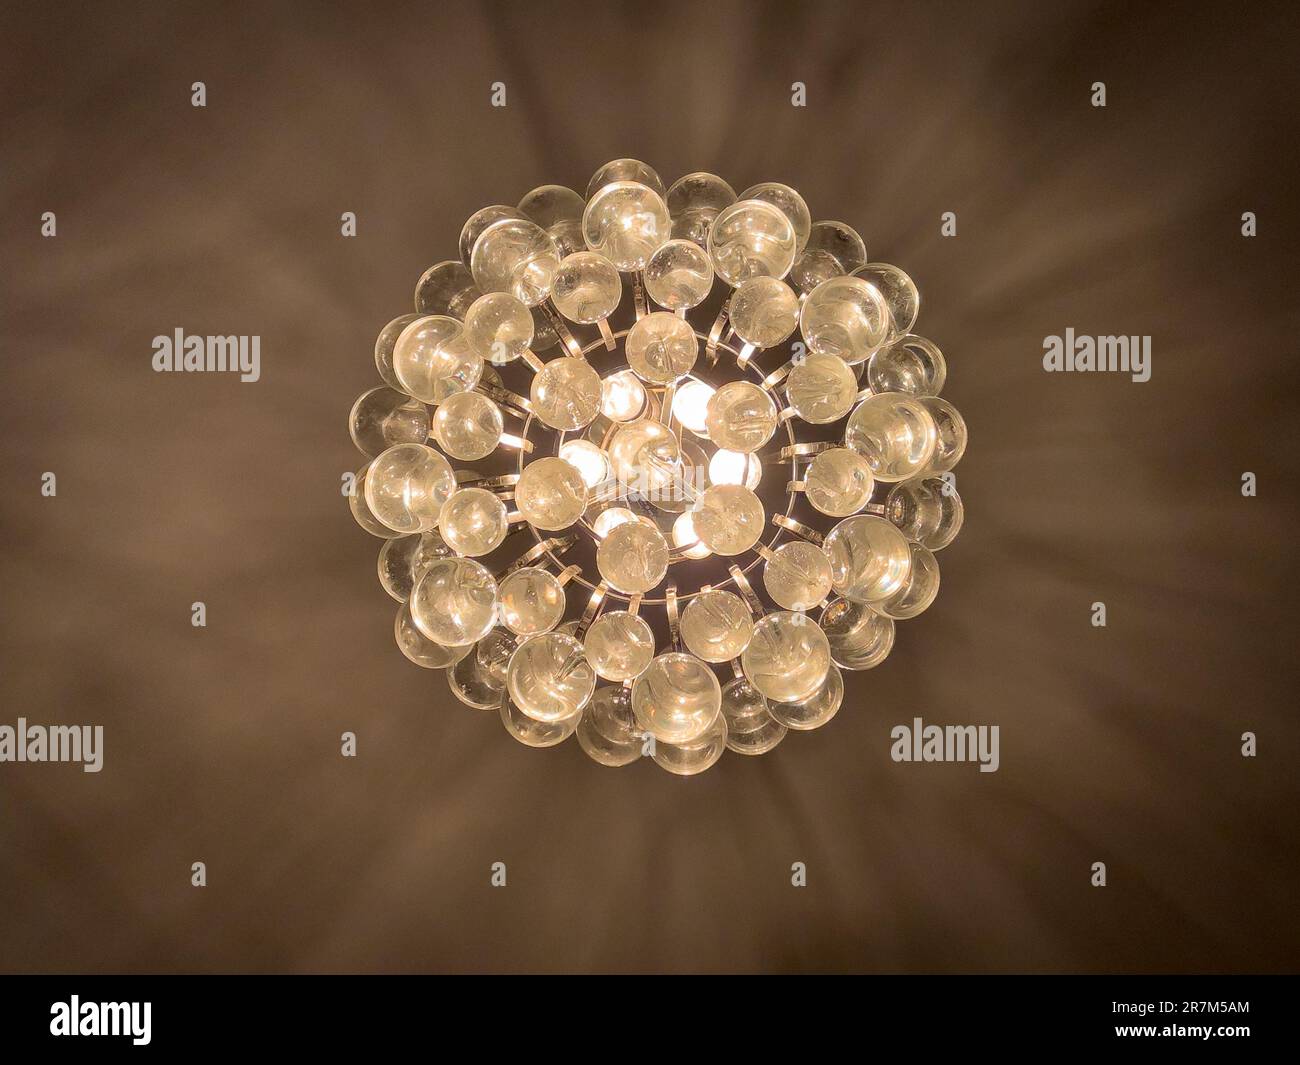 View of a light and shadowy motif on a ceiling created by a bubble glass chandelier. Stock Photo